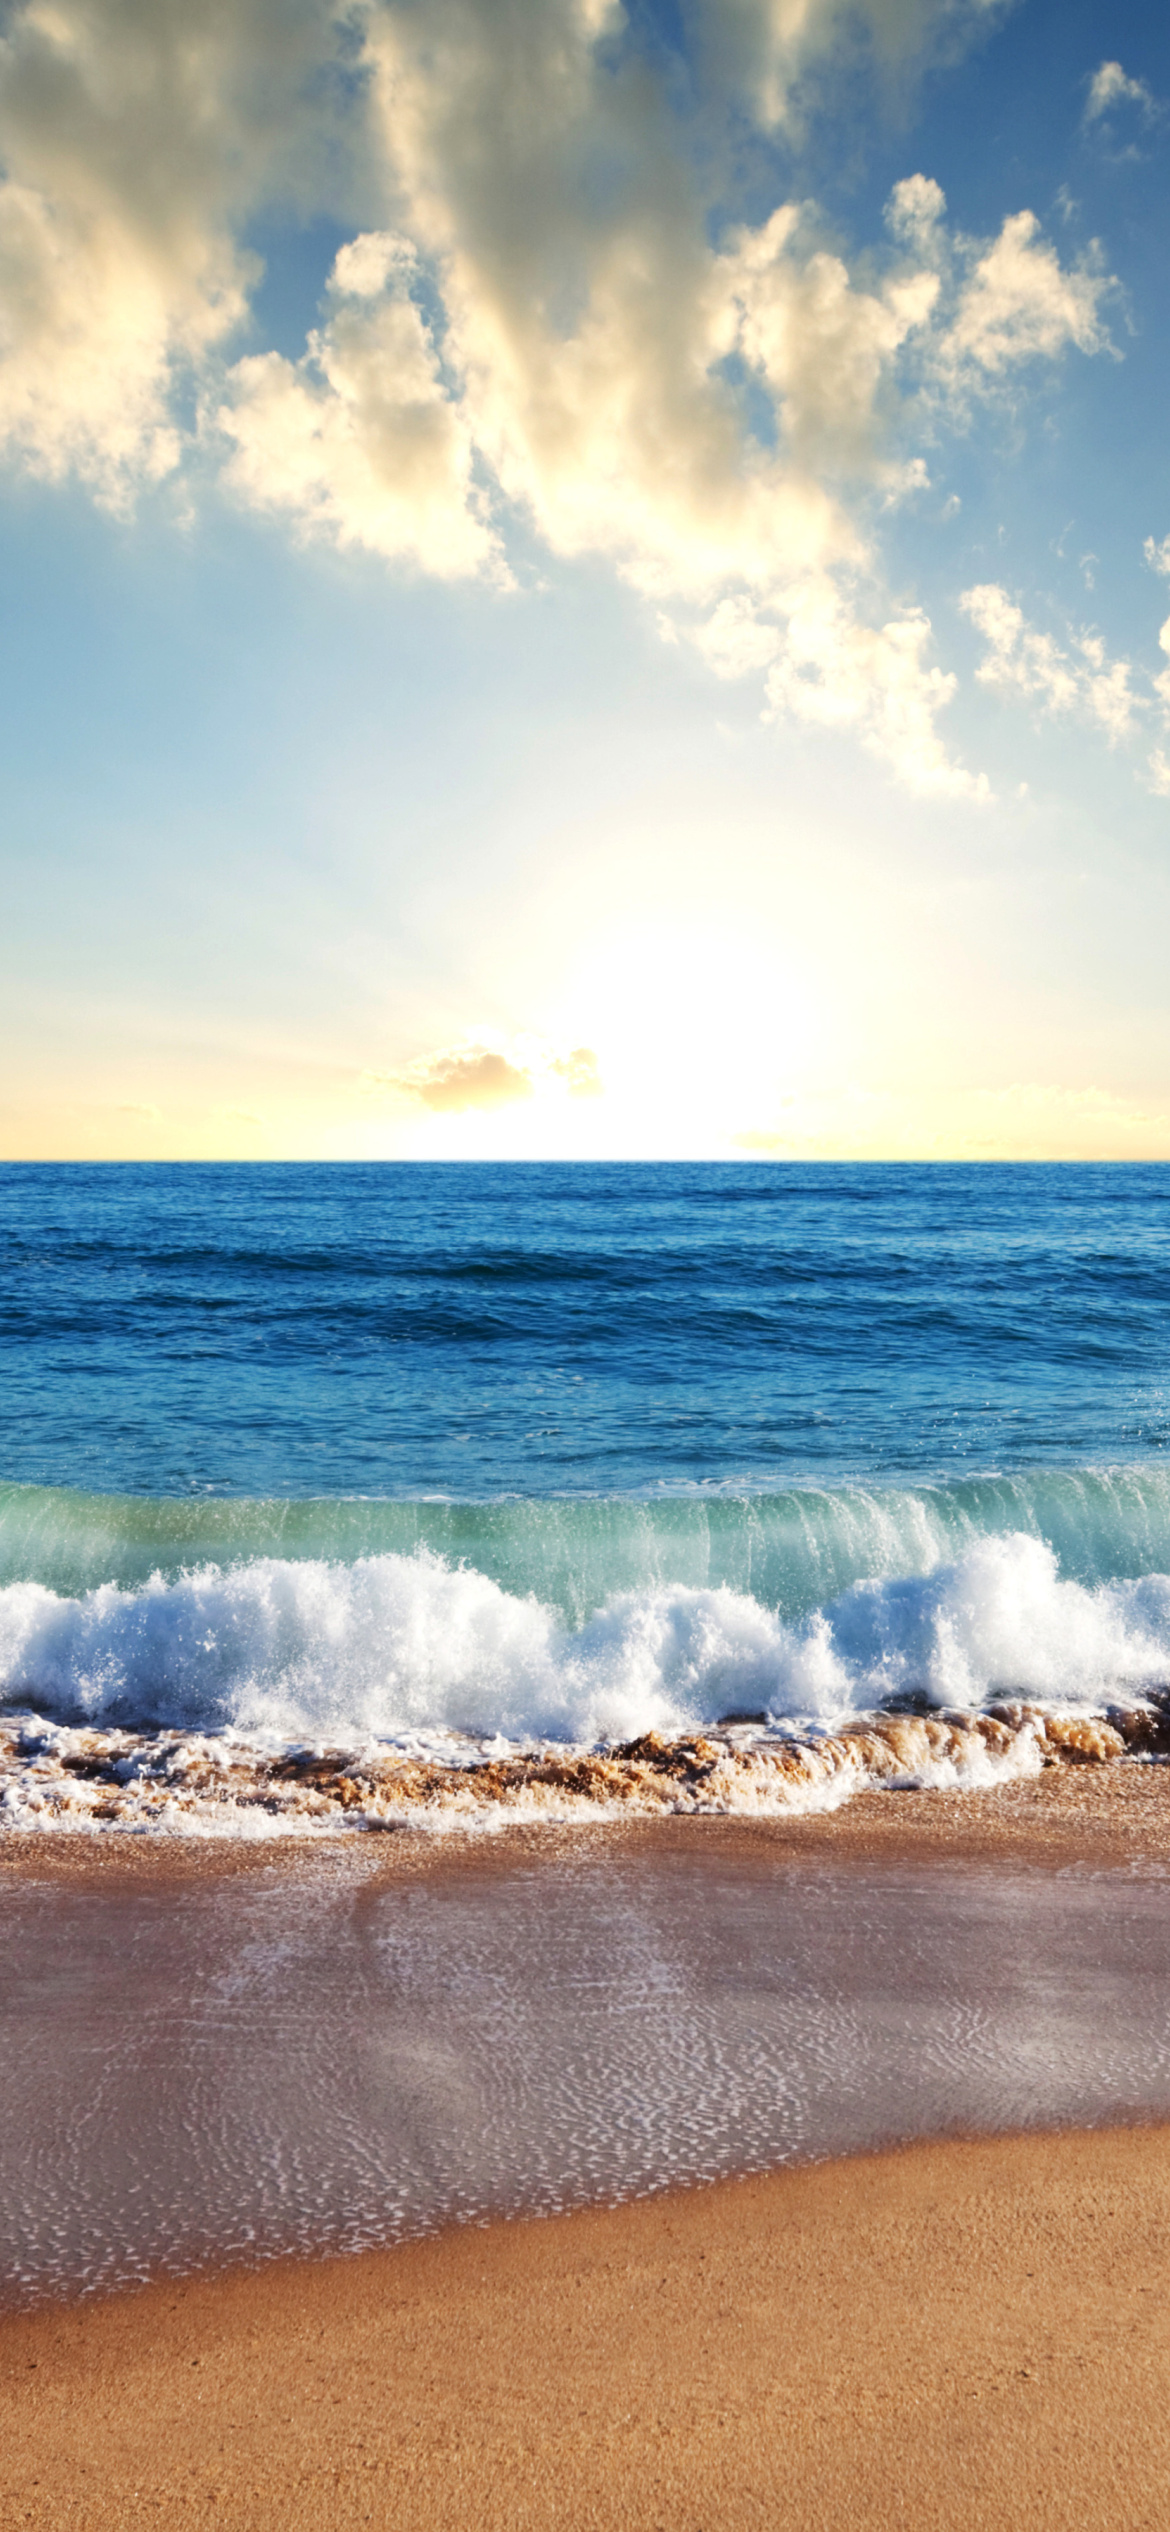 Beach and Waves wallpaper 1170x2532